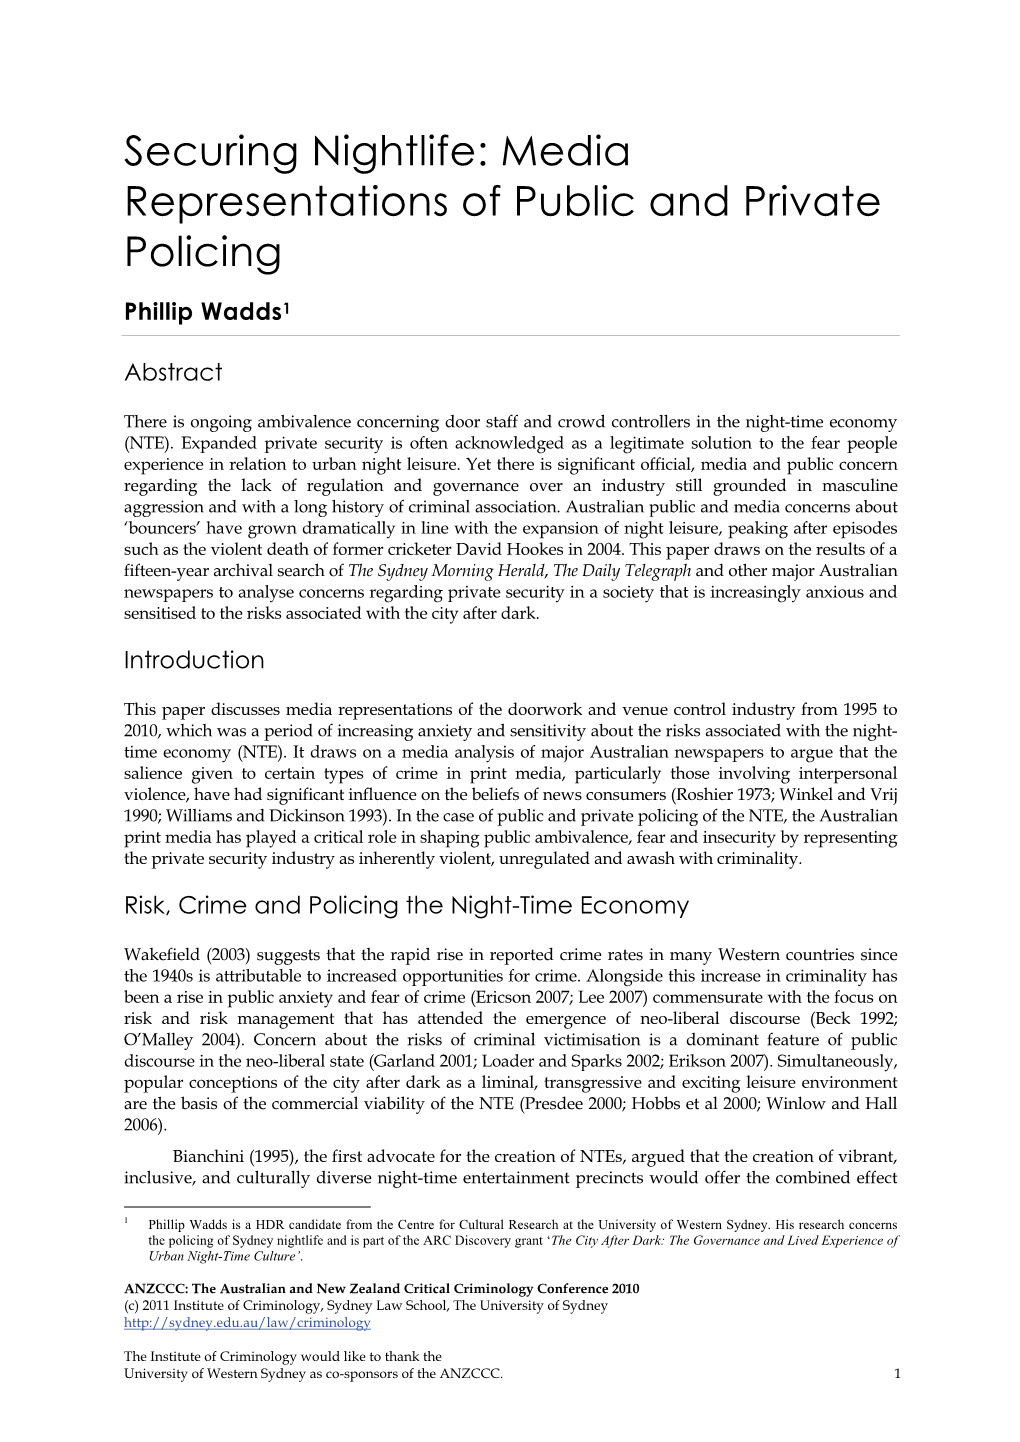 Media Representations of Public and Private Policing